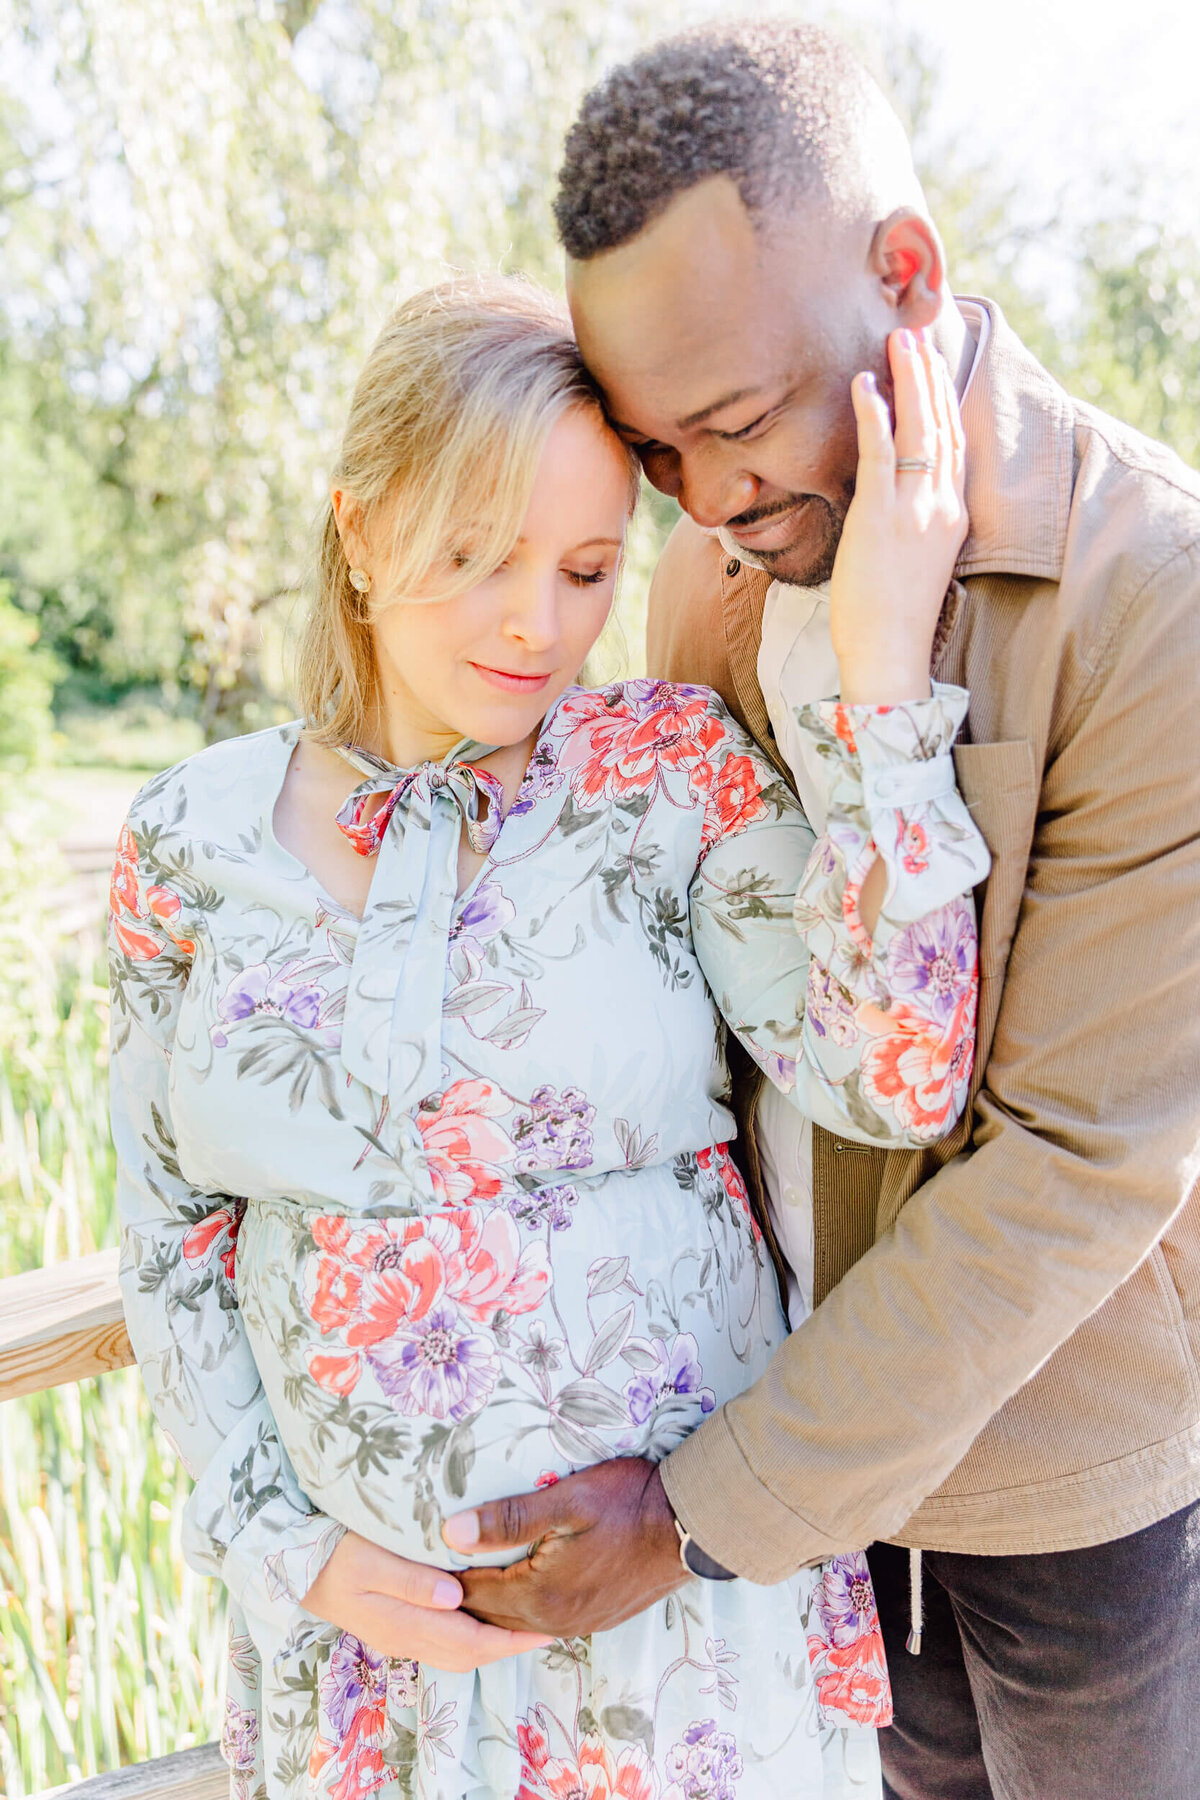 Pregnant woman in light floral dress and her husand gaze down at her bump while cradling it together